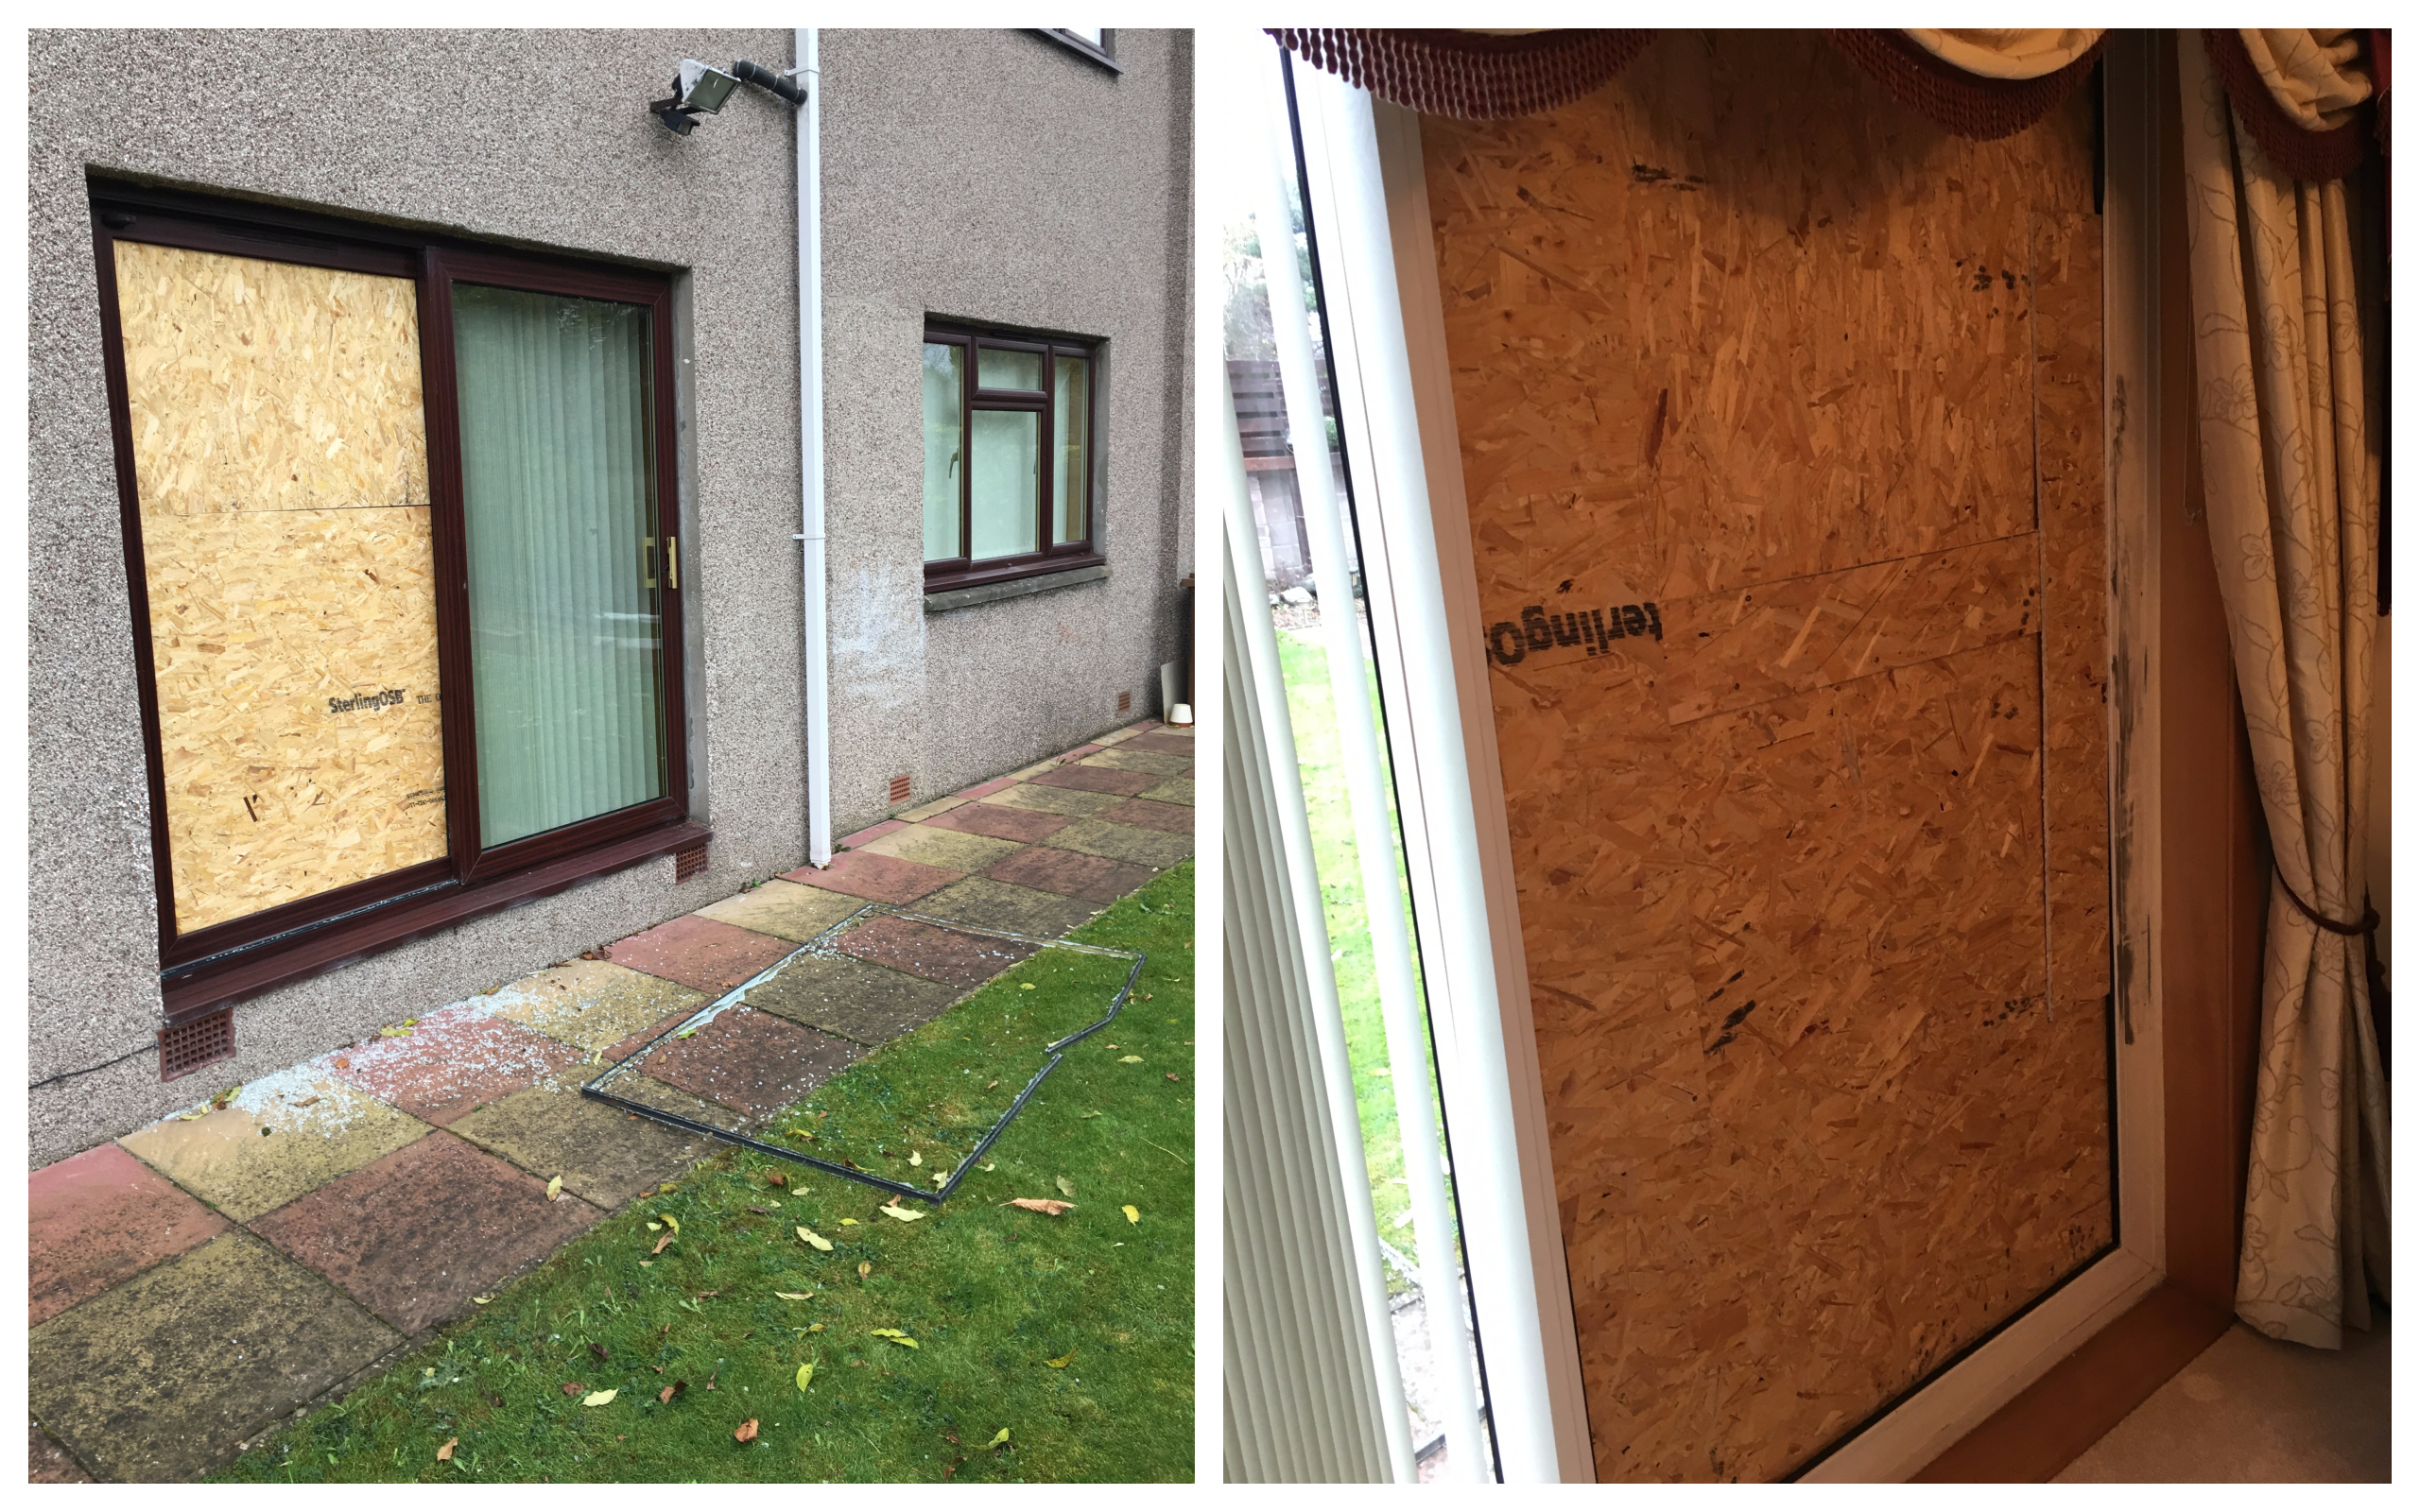 A family has been left devastated following a break in on Seaforth Road